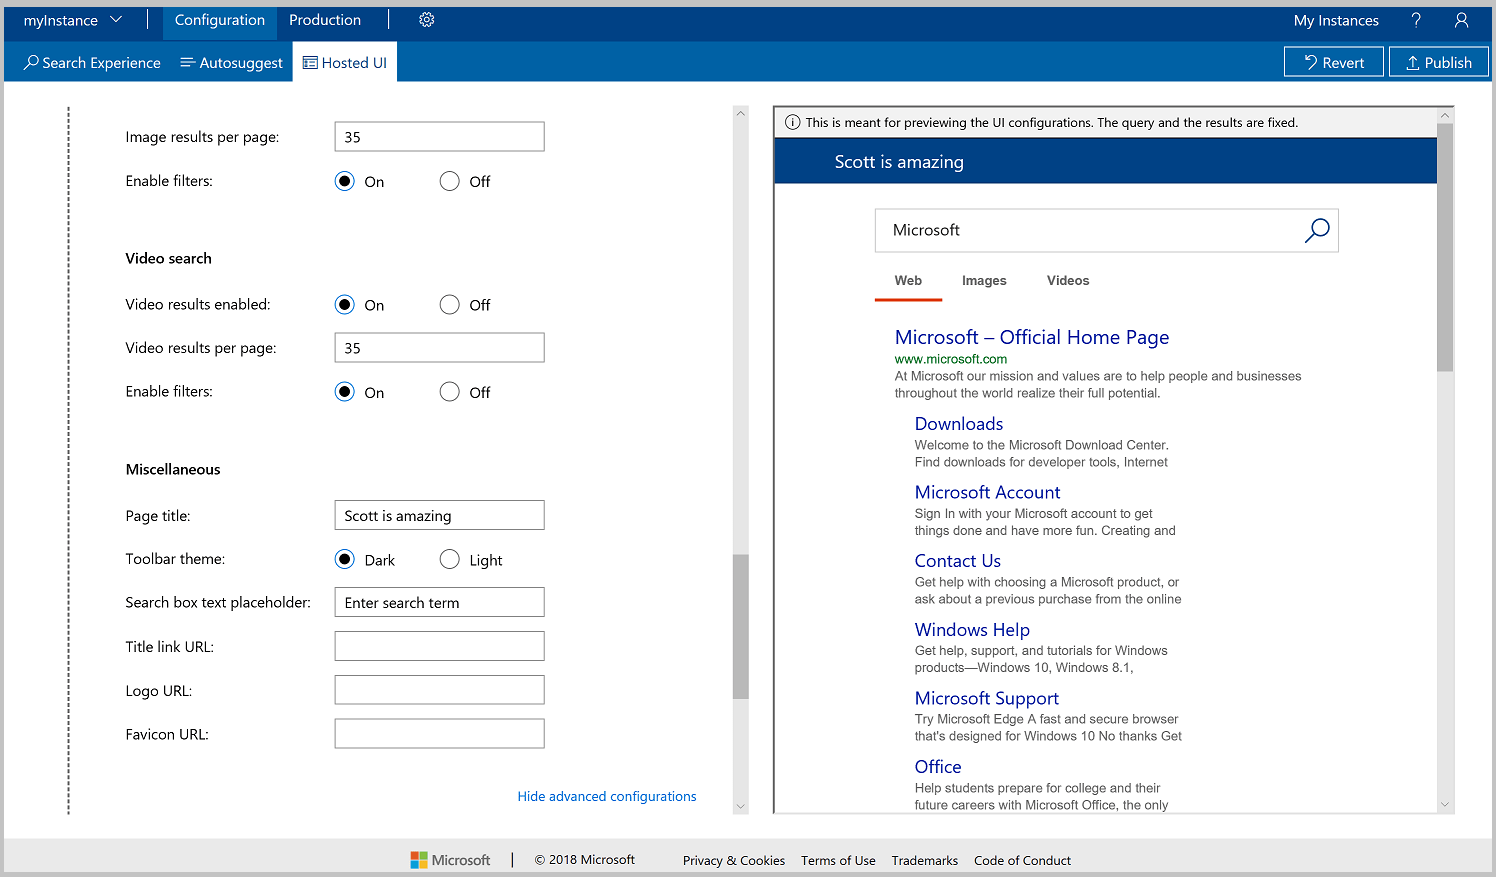 Screenshot of the Hosted UI advanced configurations step